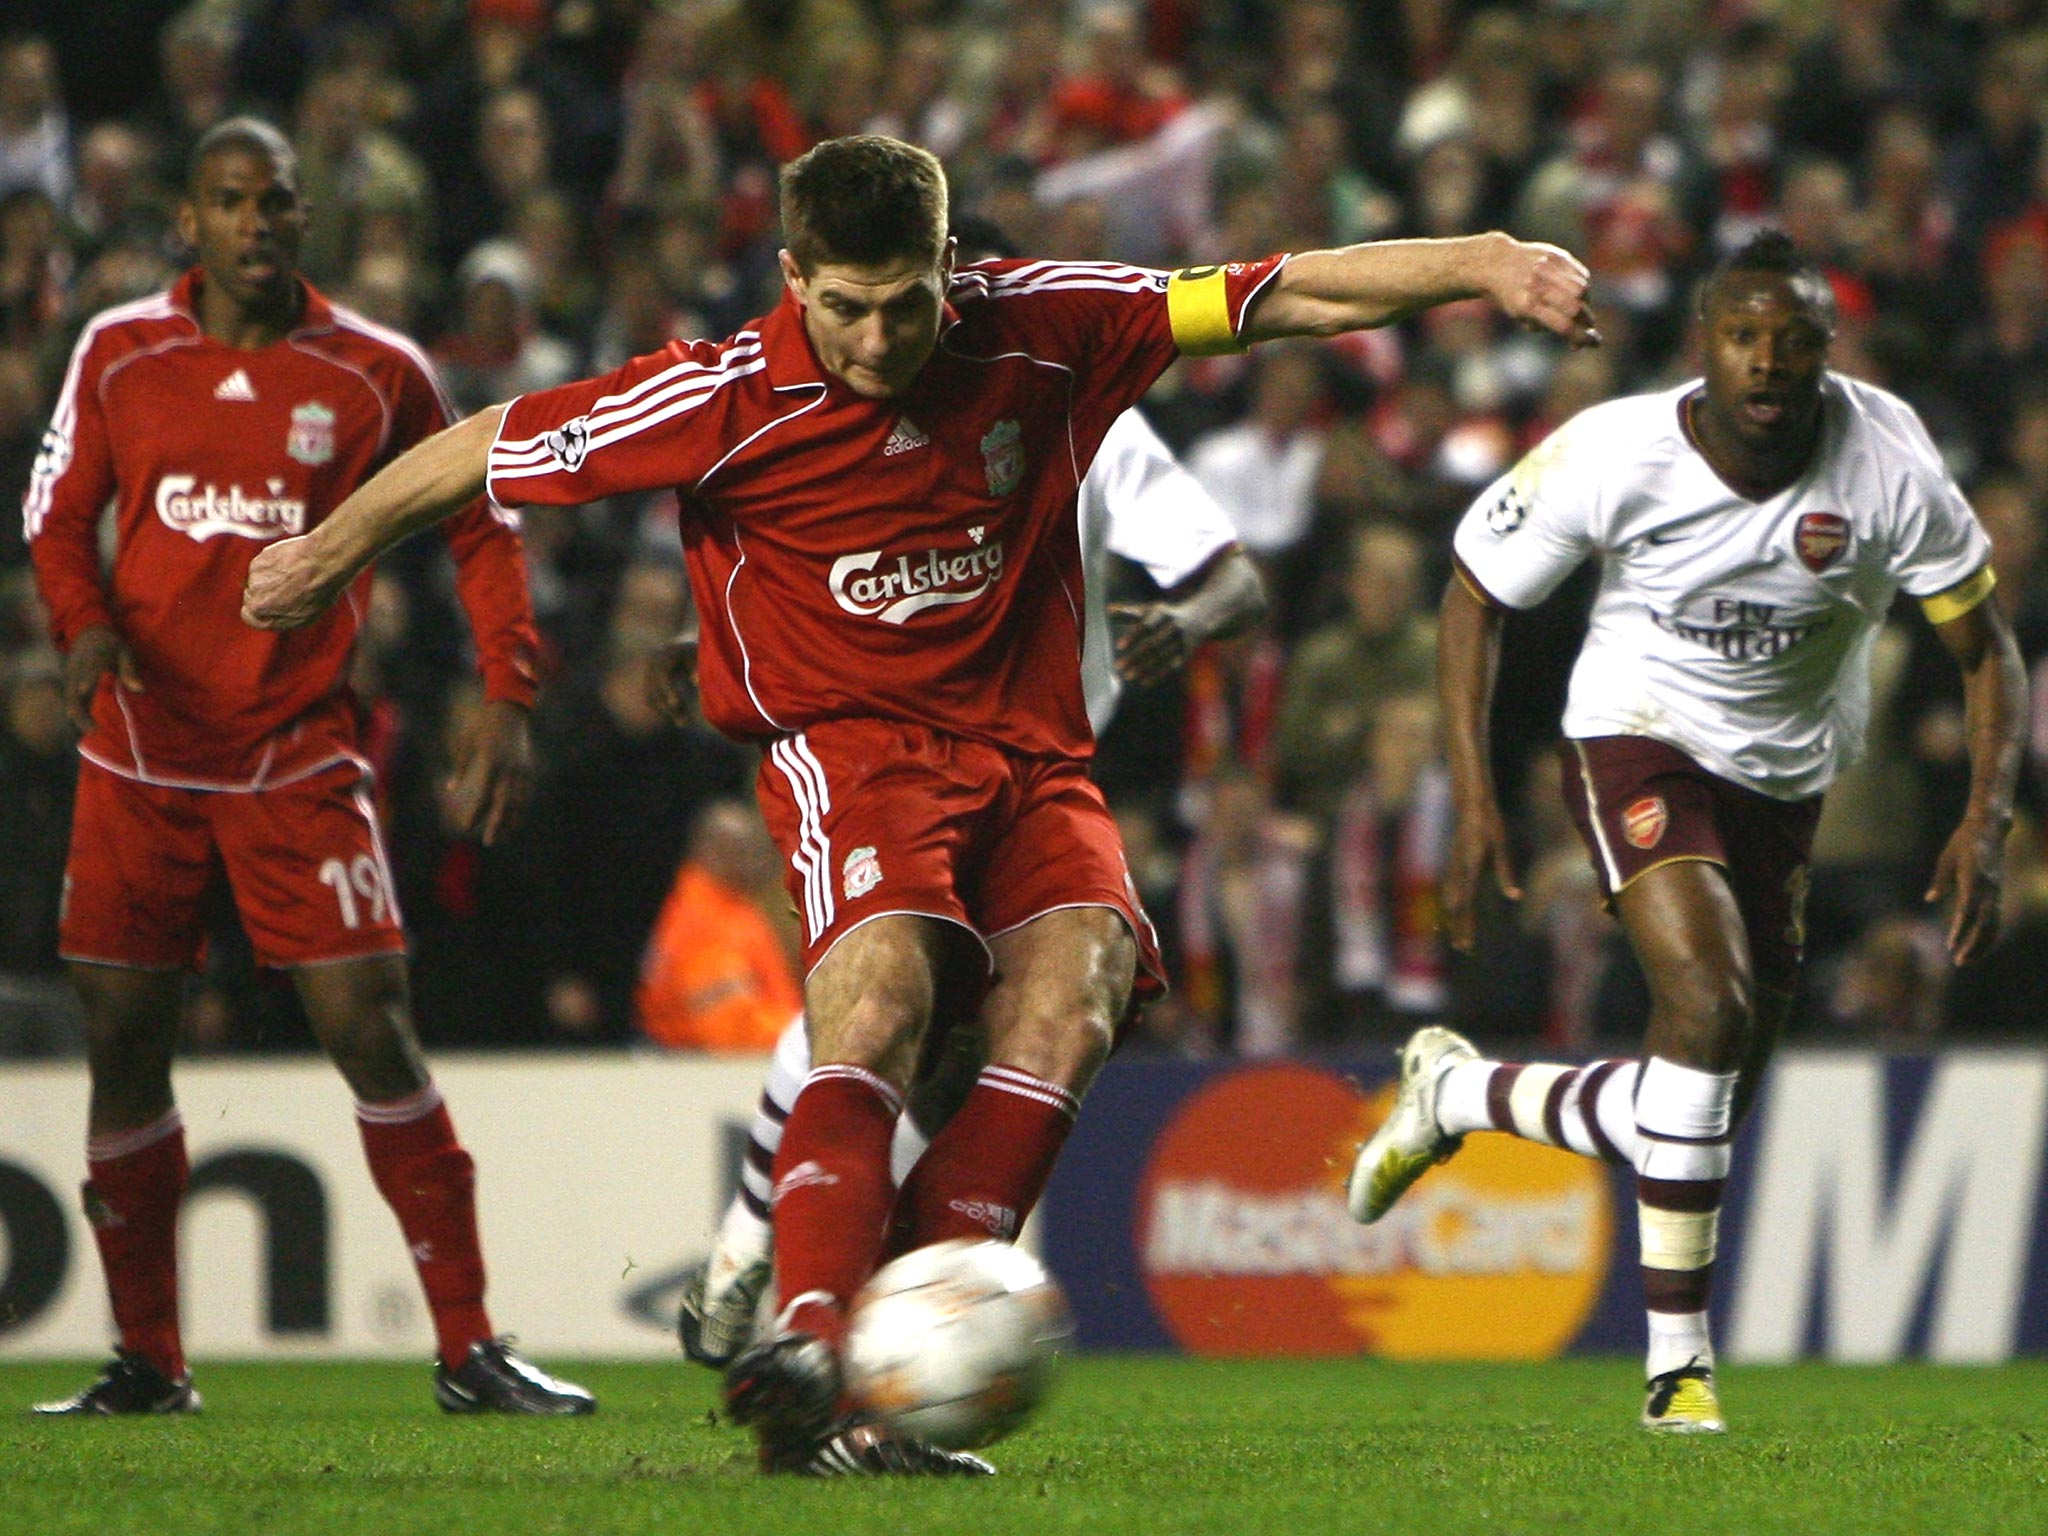 Steven Gerrard scores a penalty for Liverpool during their 2008 series against Arsenal